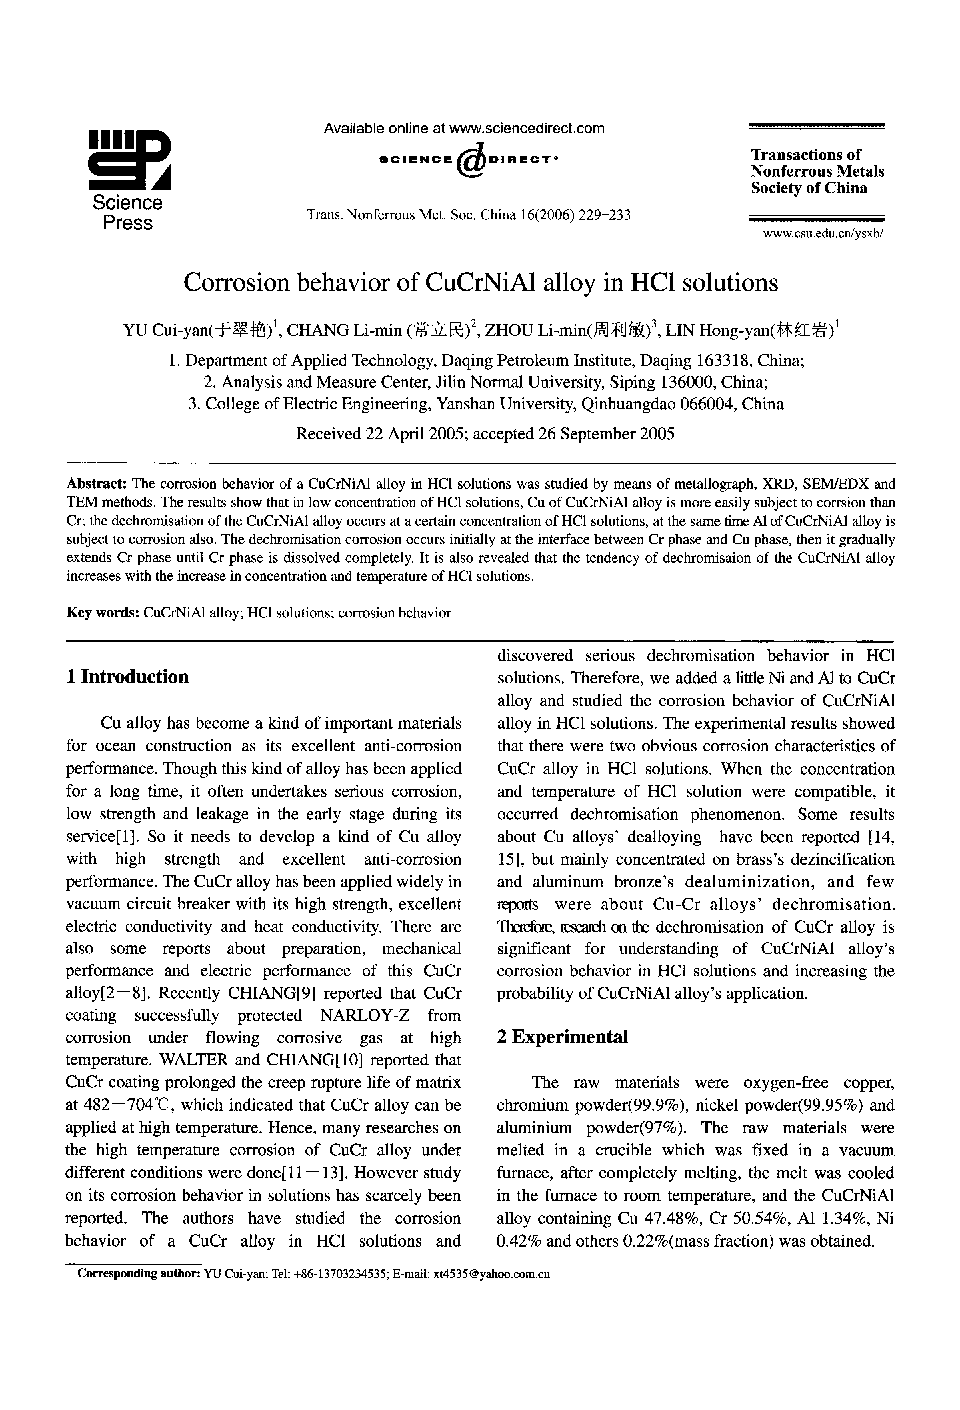 Corrosion behavior of CuCrNiAl alloy in HC1 solutions